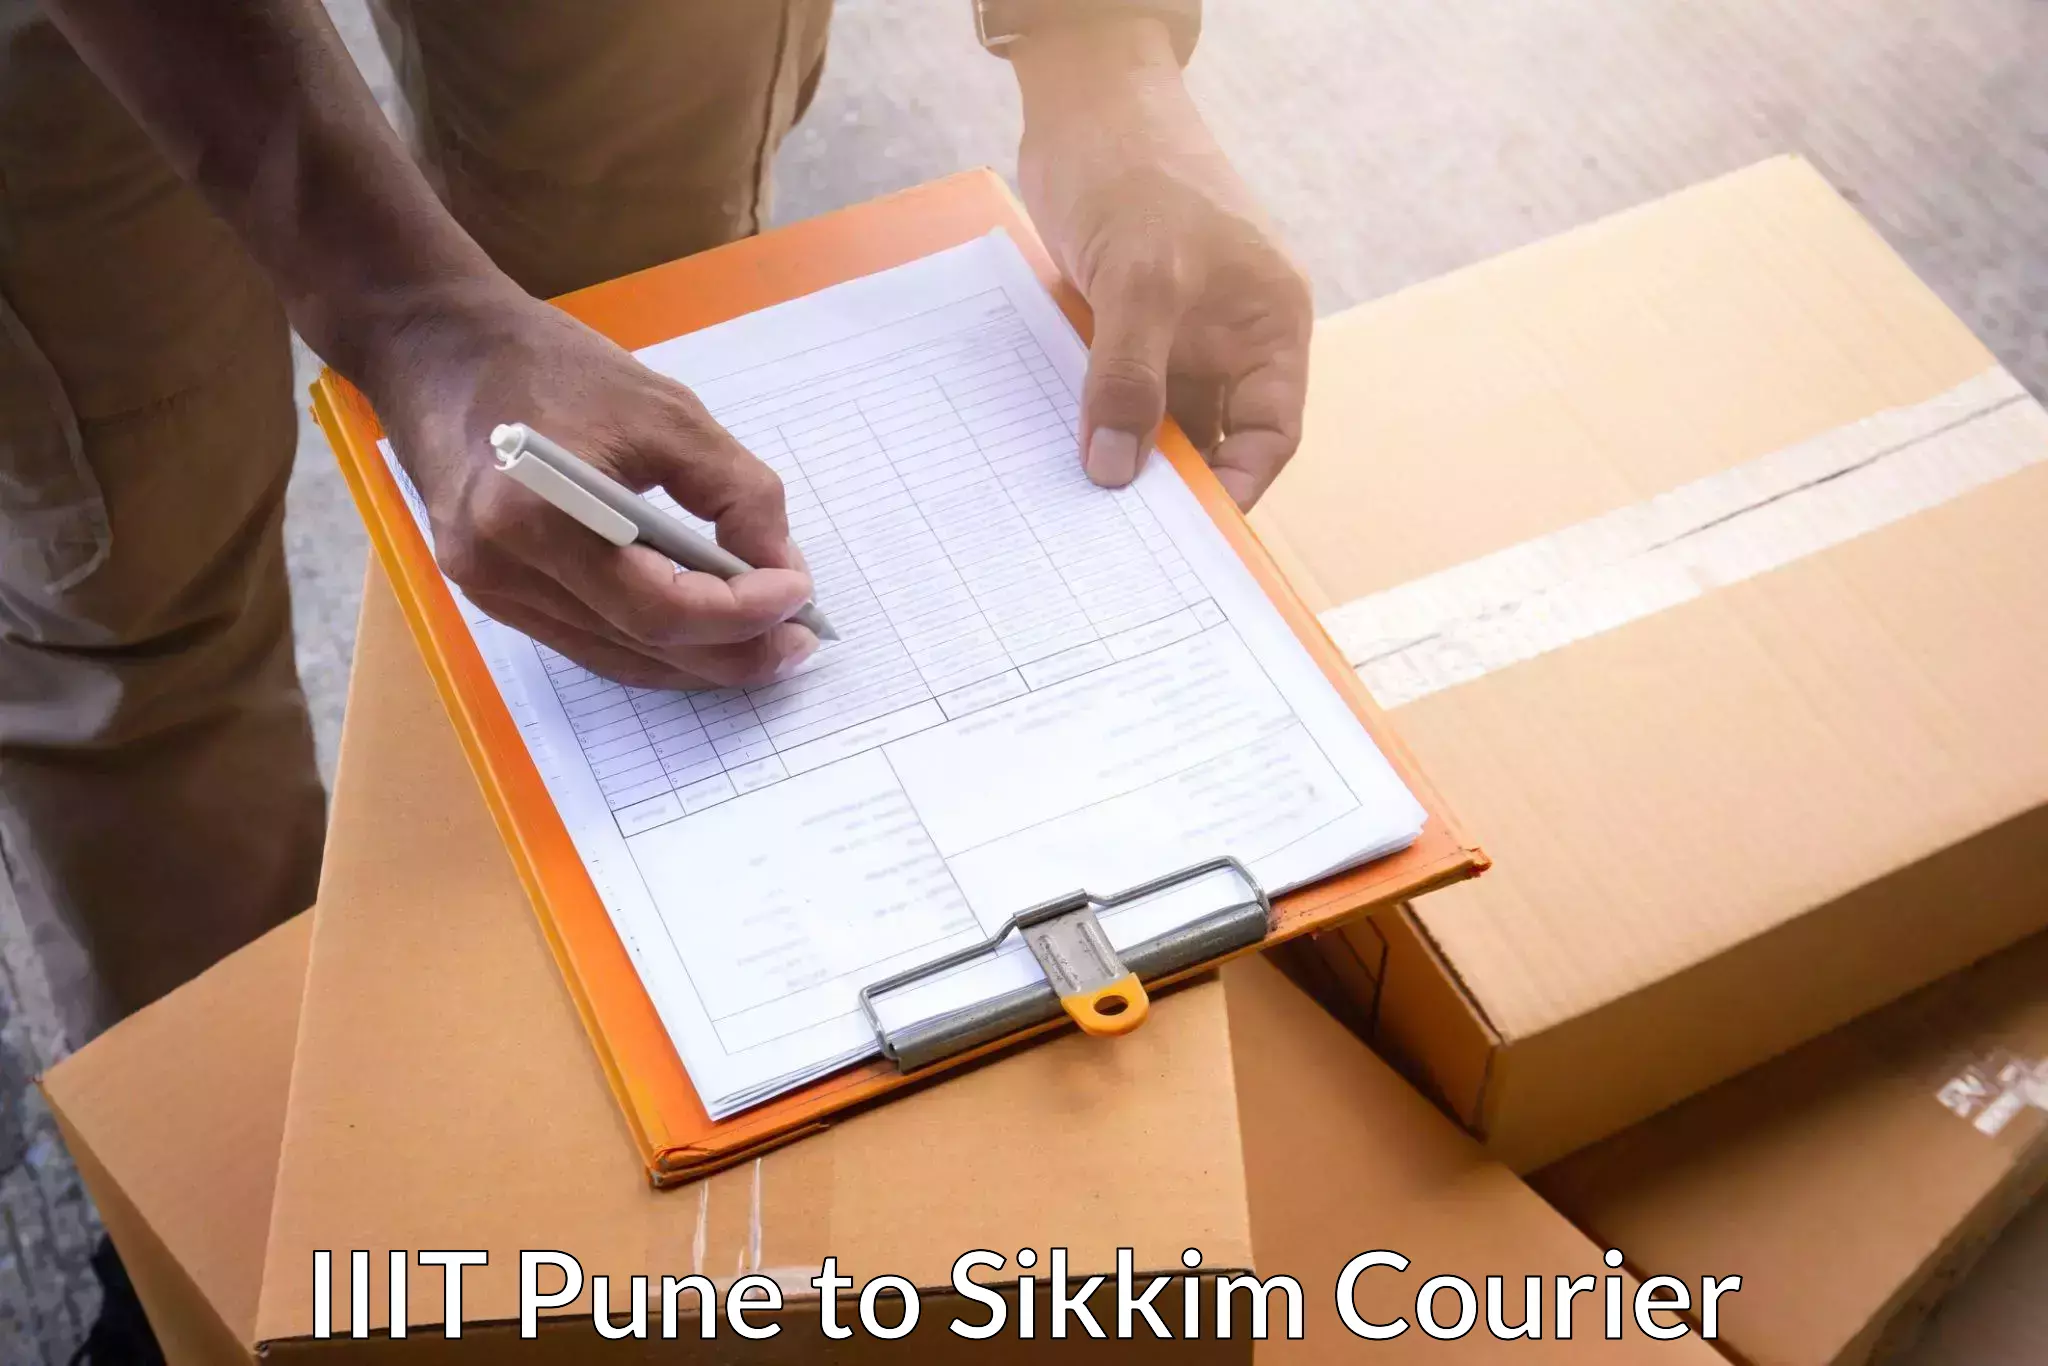 Courier service comparison IIIT Pune to East Sikkim